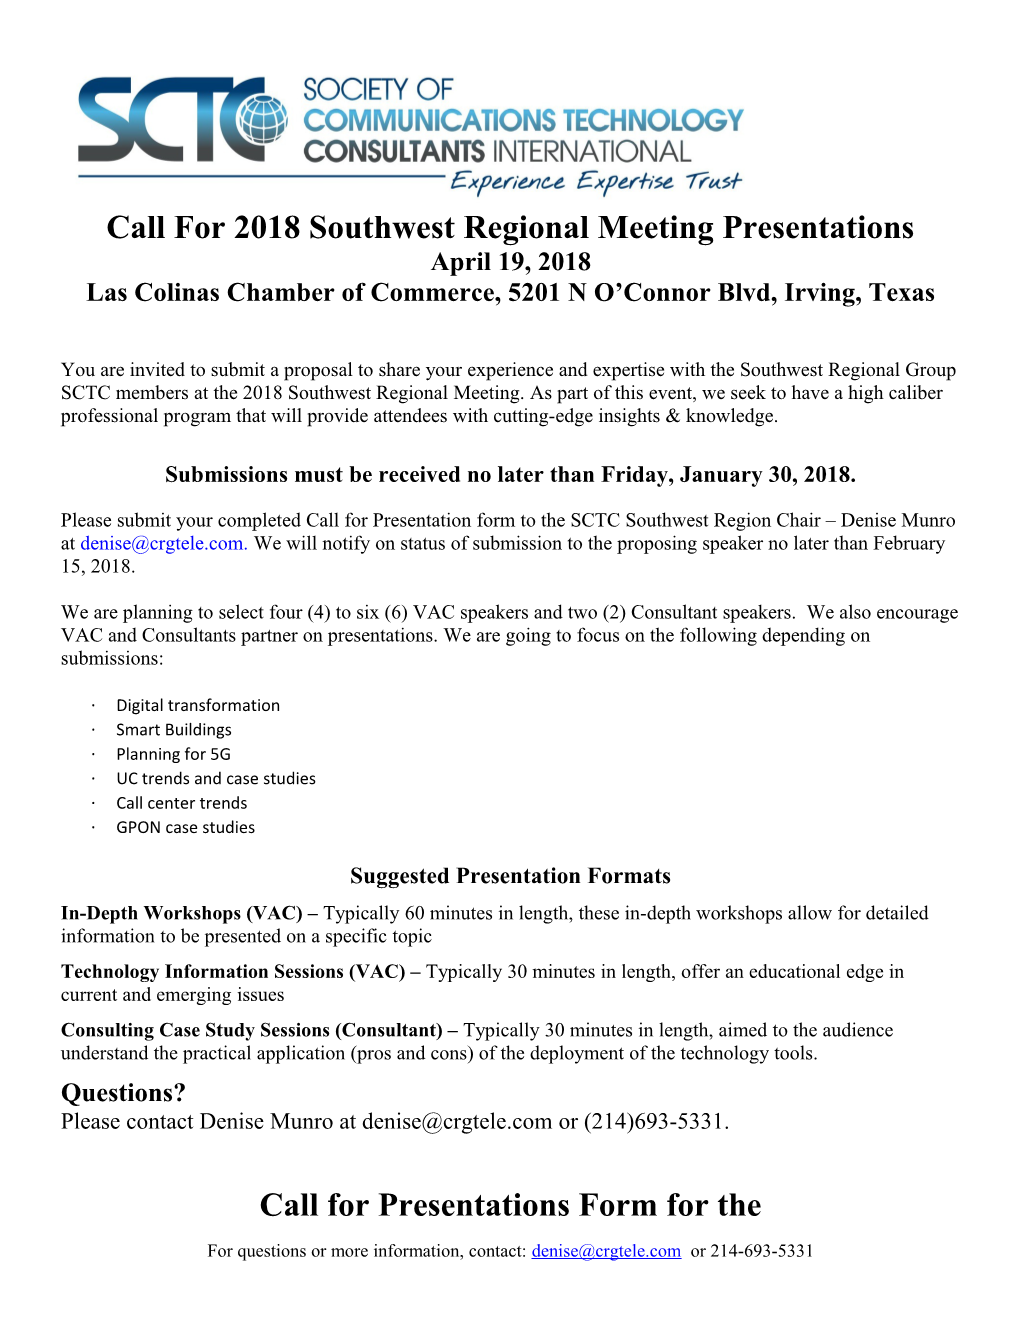 Call for 2018 Southwest Regional Meeting Presentations April 19, 2018 Las Colinas Chamber